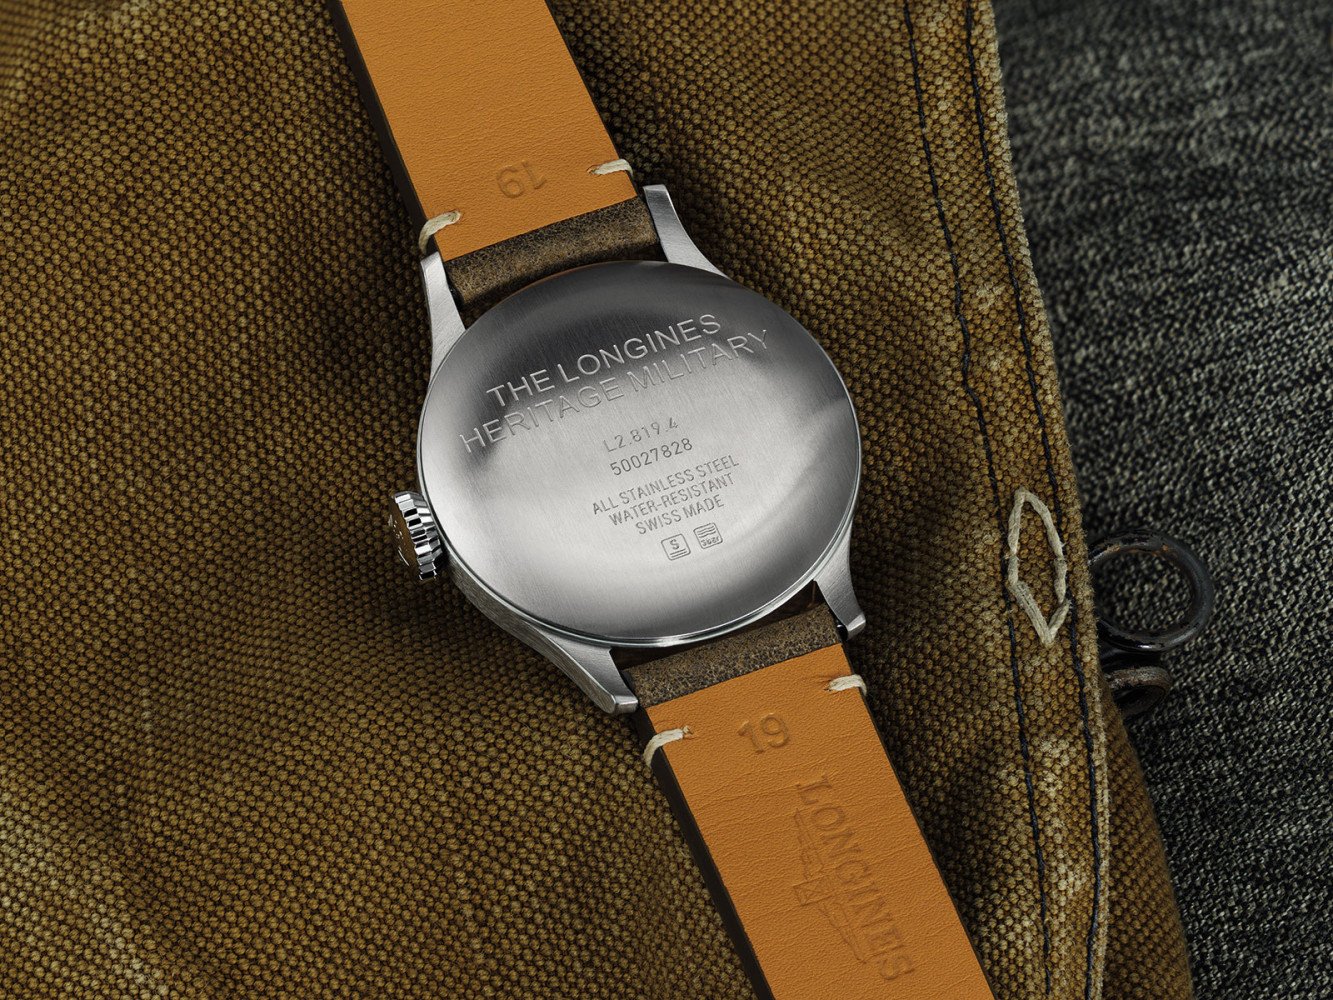 The Longines Heritage Military Watch